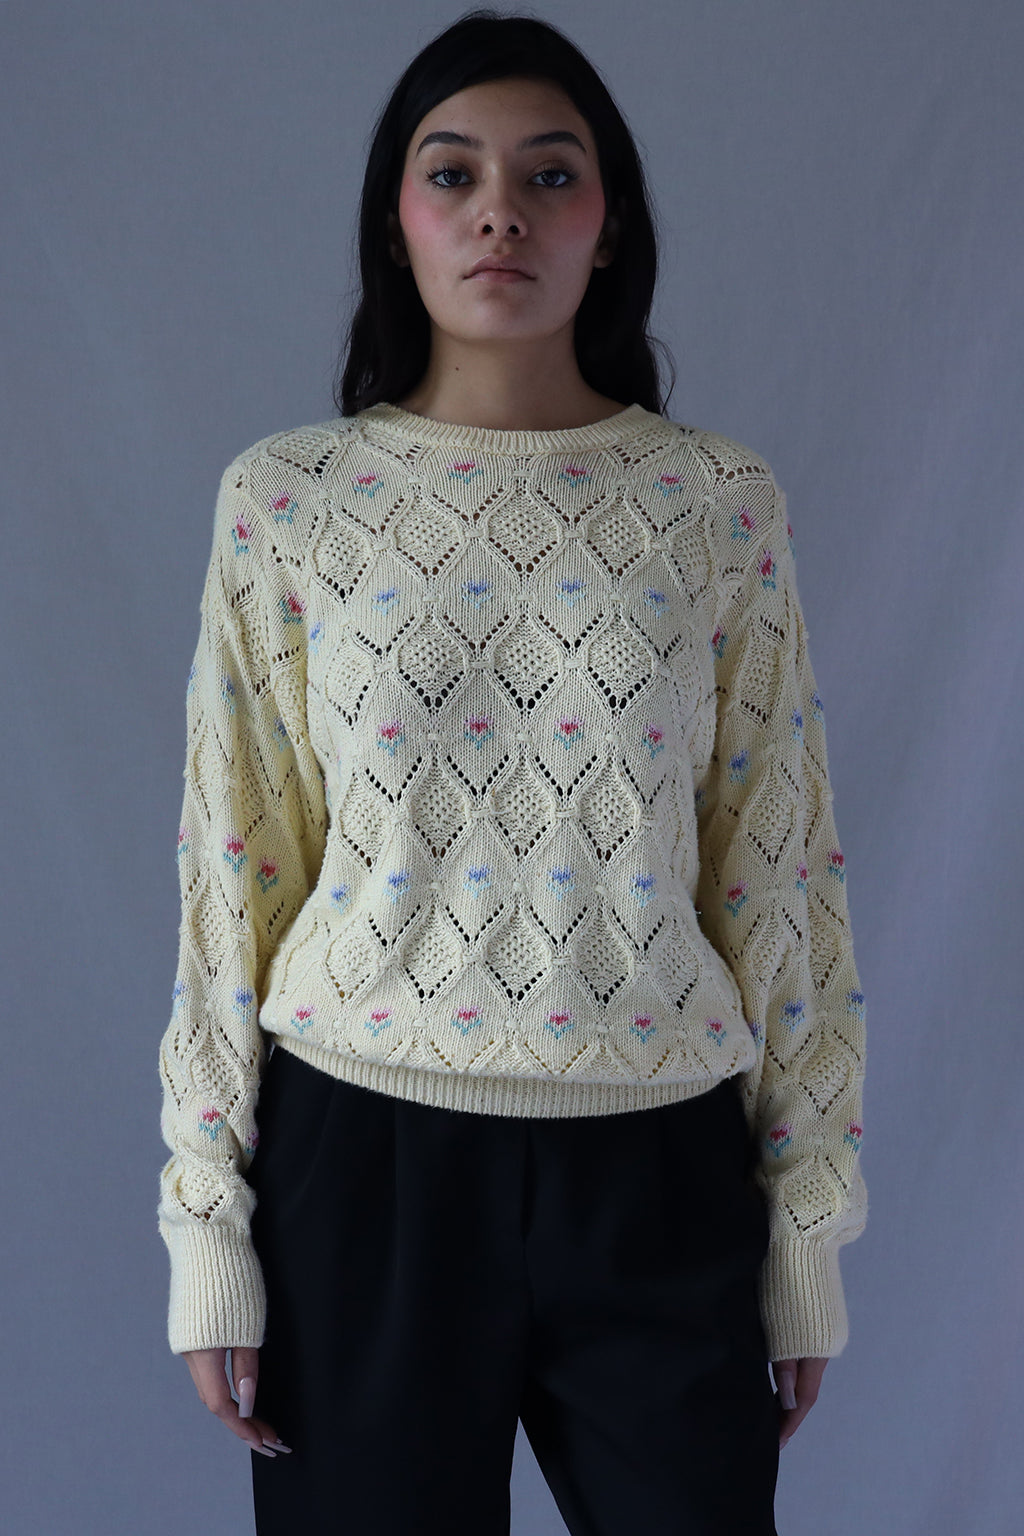 Vintage Laura Ashley Floral Knit Sweater